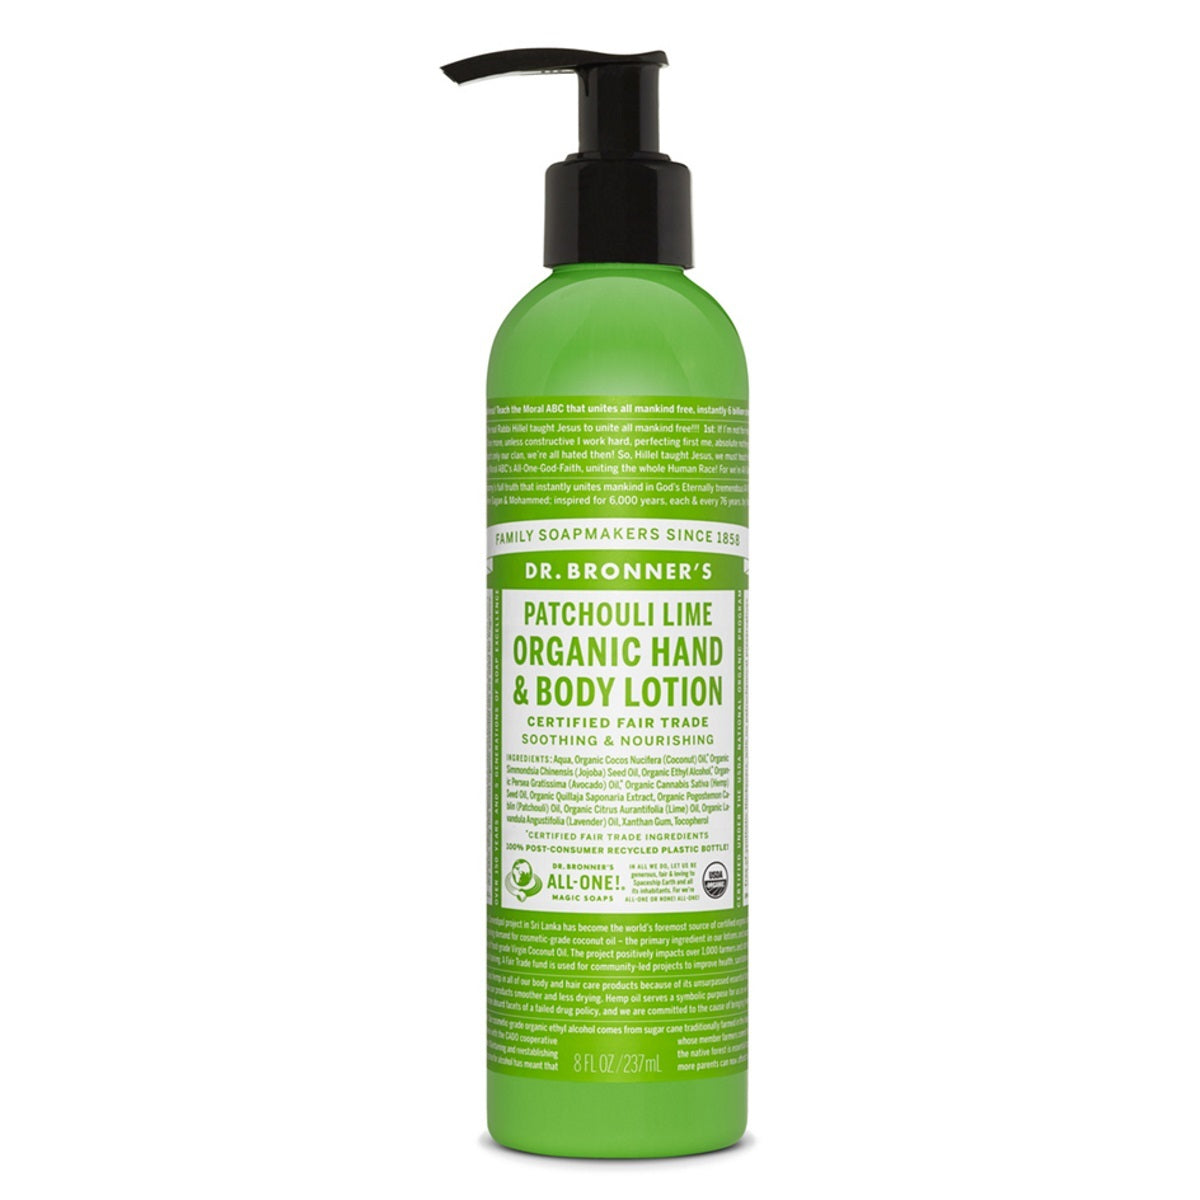 Primary image of Patchouli Lime Organic Hand  Body Lotion